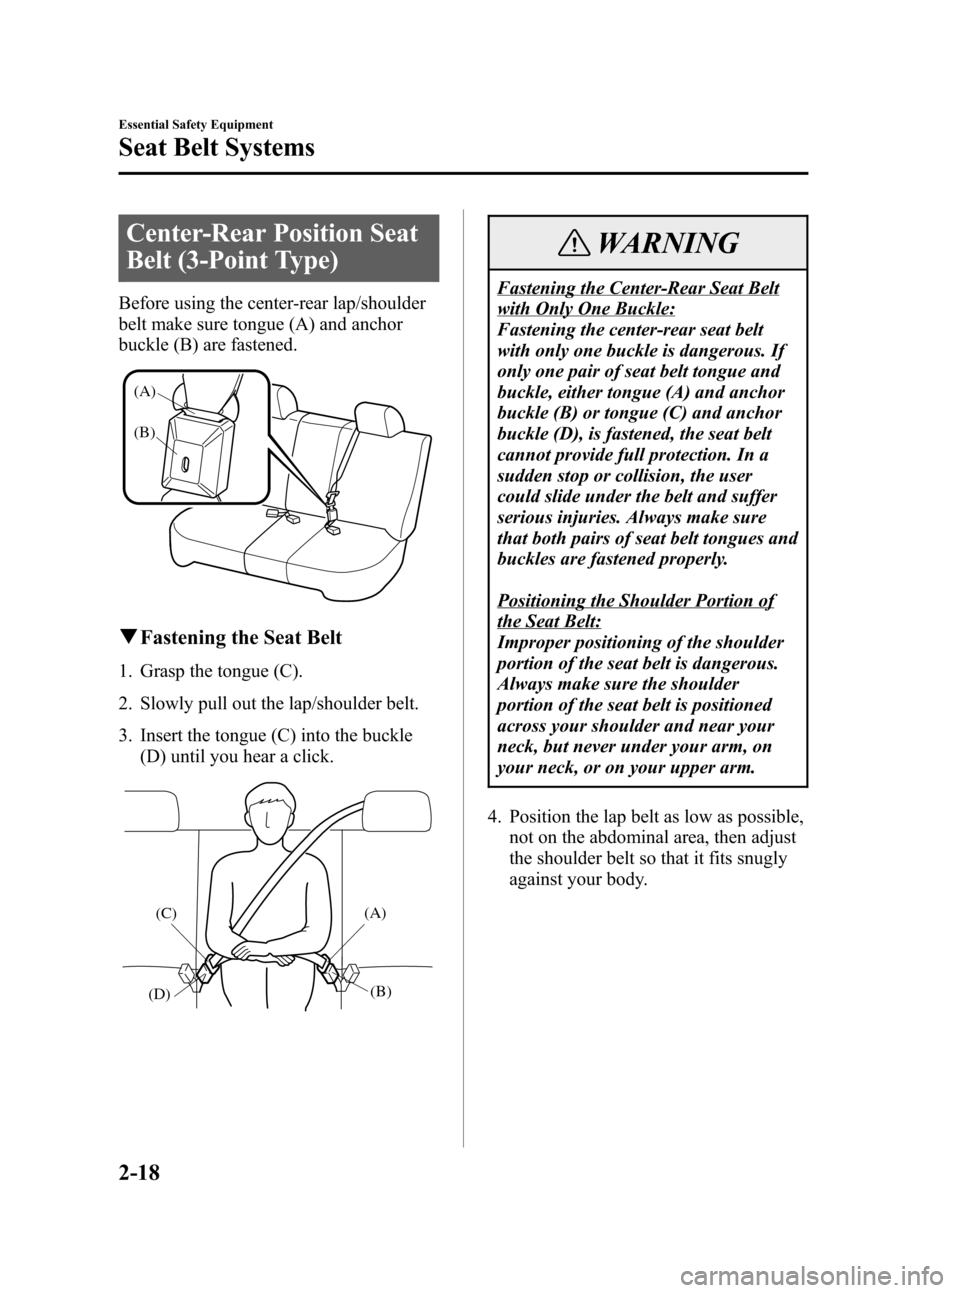 MAZDA MODEL 3 HATCHBACK 2007   (in English) Owners Guide Black plate (32,1)
Center-Rear Position Seat
Belt (3-Point Type)
Before using the center-rear lap/shoulder
belt make sure tongue (A) and anchor
buckle (B) are fastened.
(A)
(B)
qFastening the Seat Bel